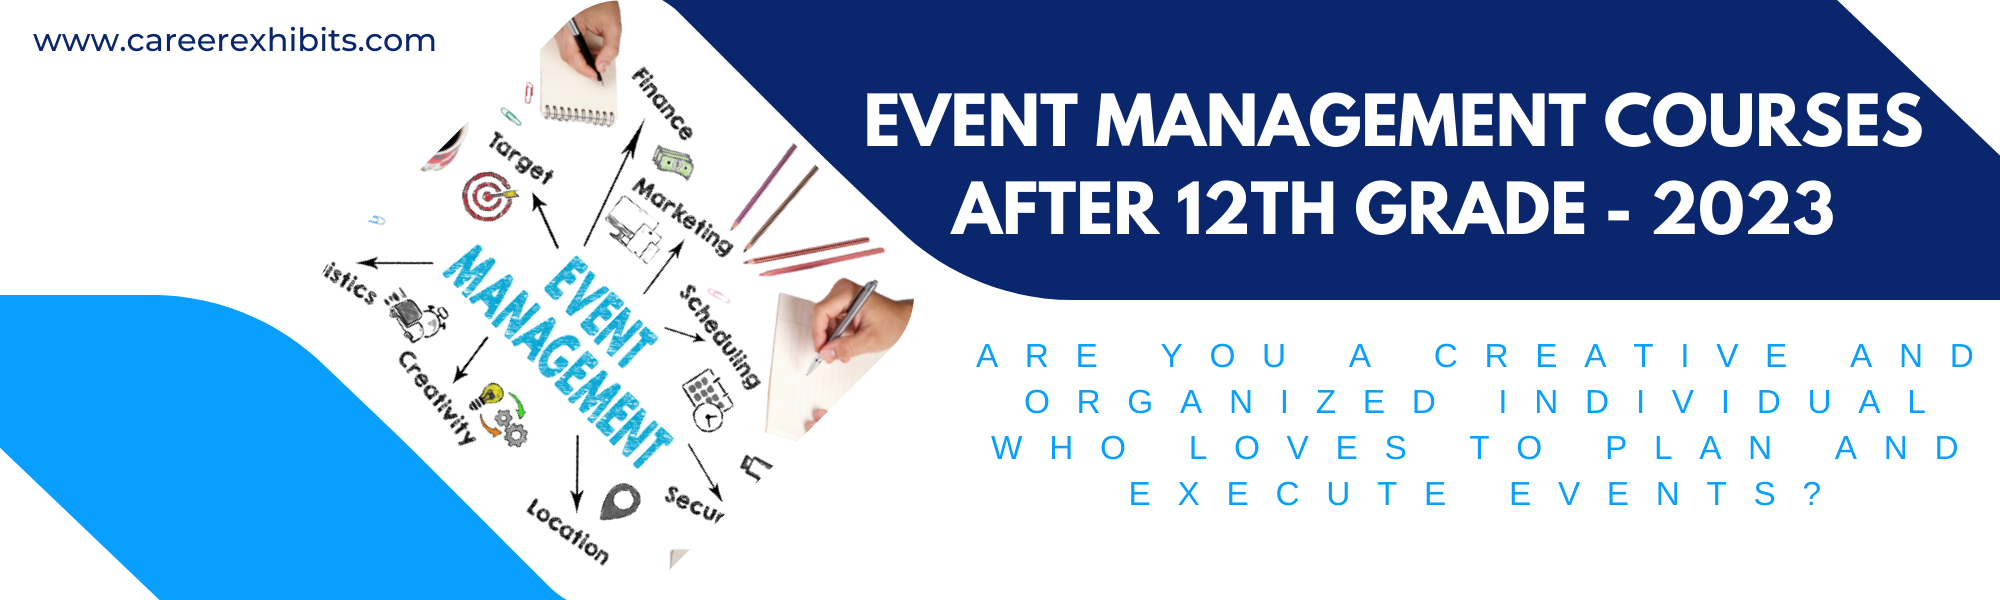 event management courses after 12th